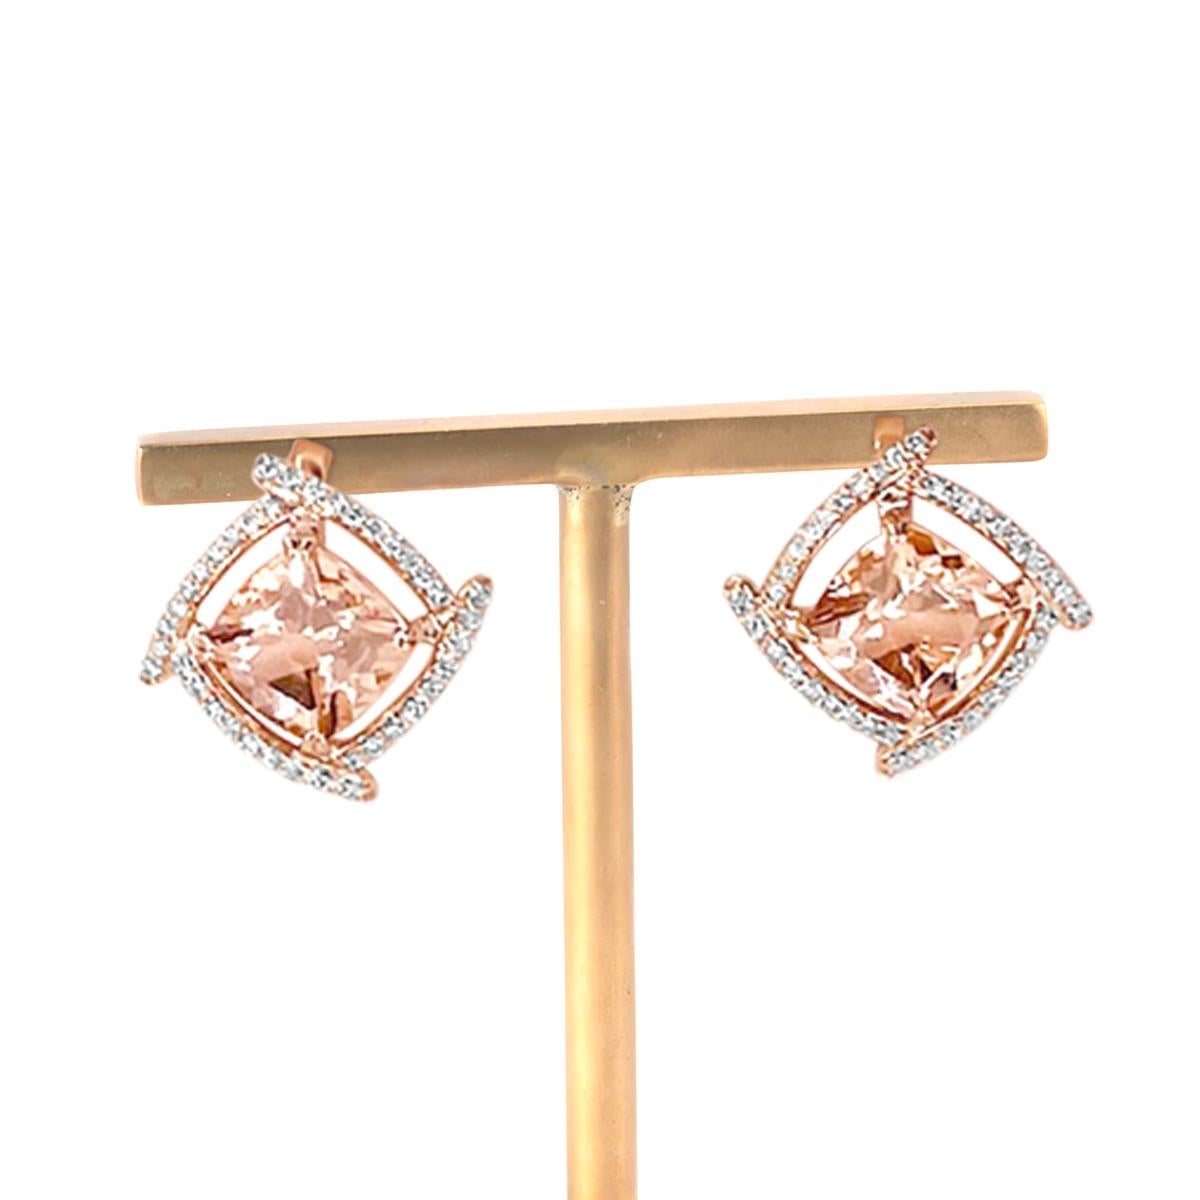 Modern 14K Rose Gold 4.11cts Morganite and Diamond Earring. Style# E4679MO For Sale